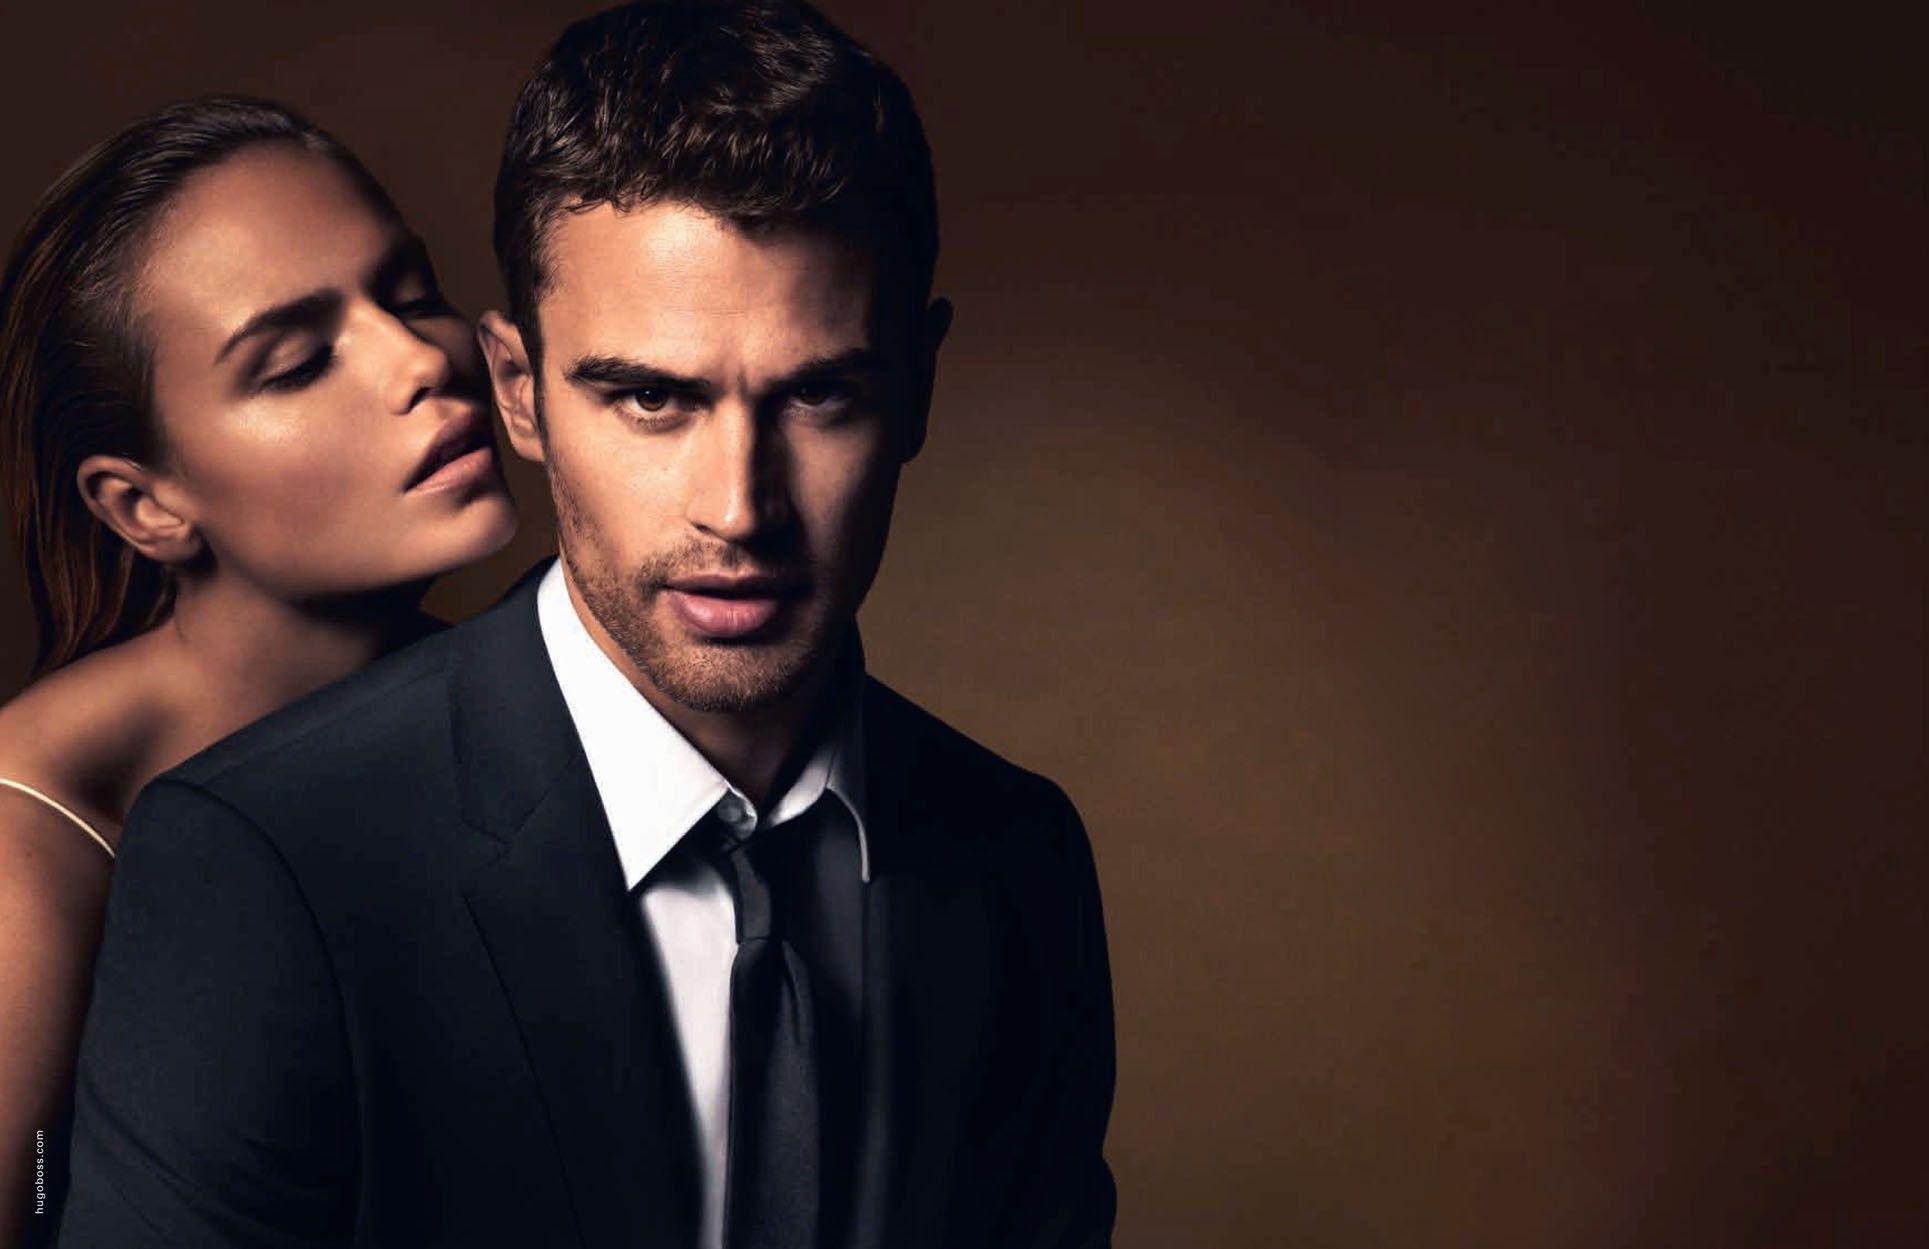 Boss The Scent Theo James Image HD Wallpaper